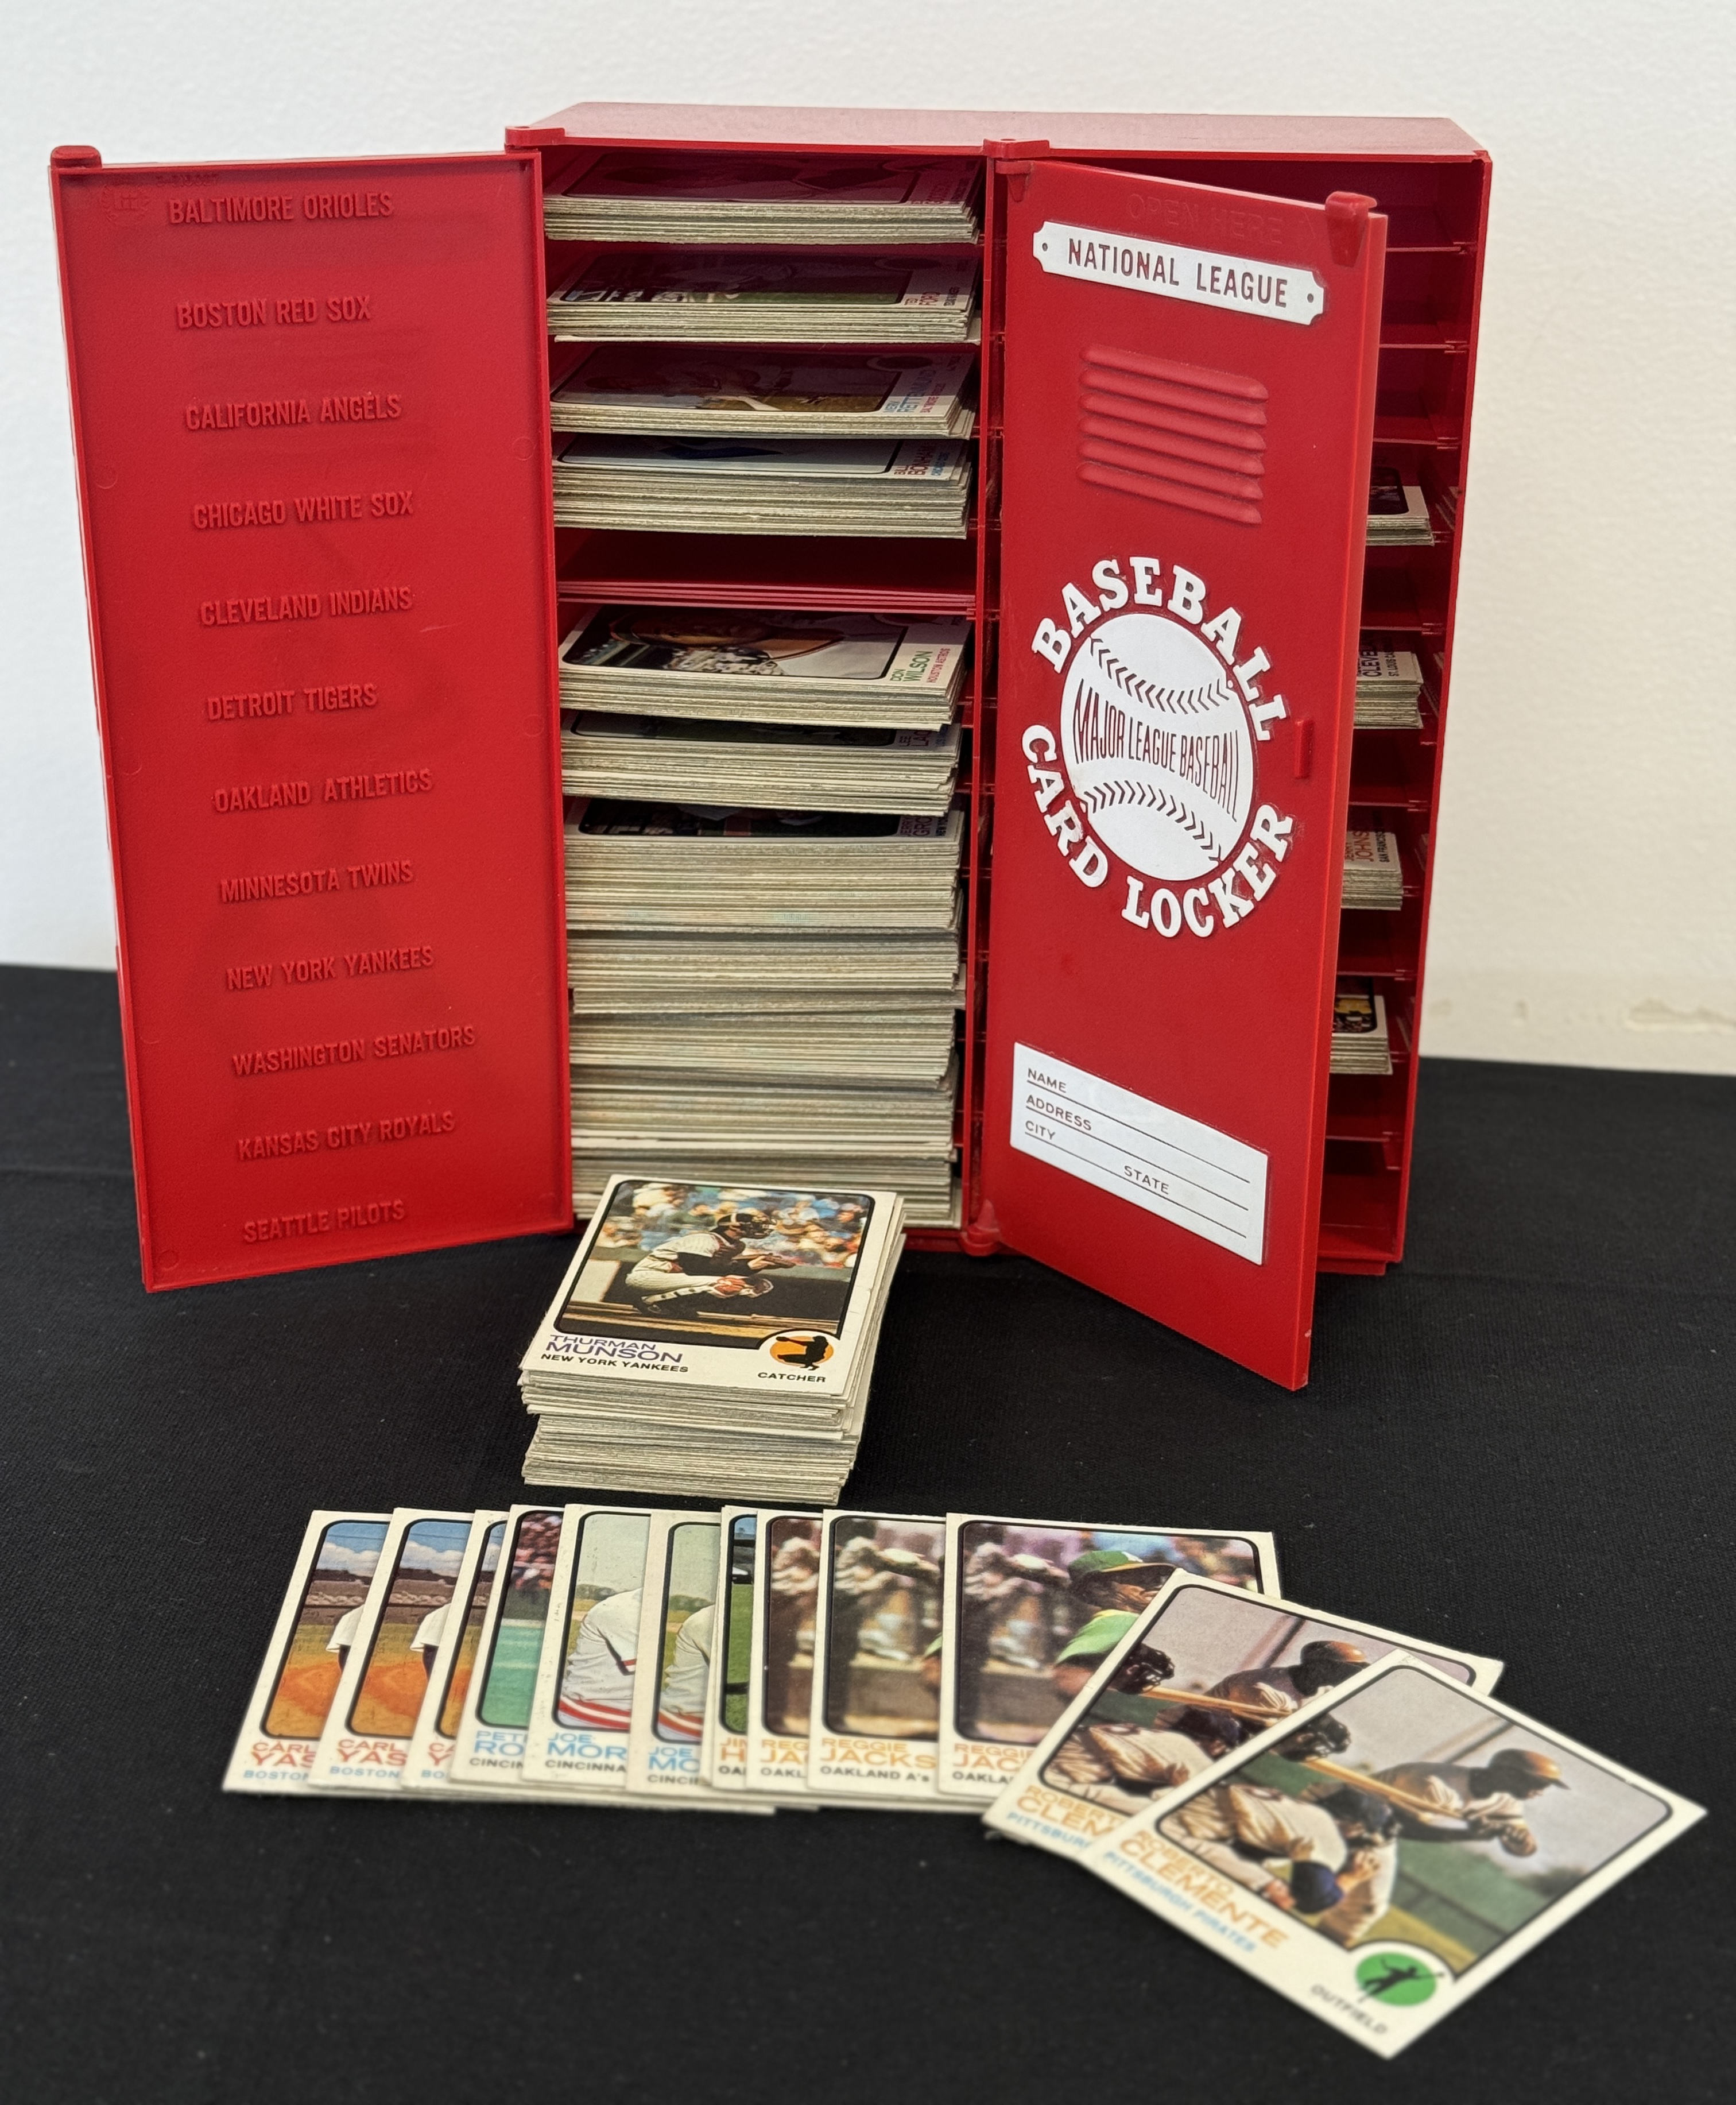 Vintage Breaks Purchases 1973 Topps Baseball Card Collection